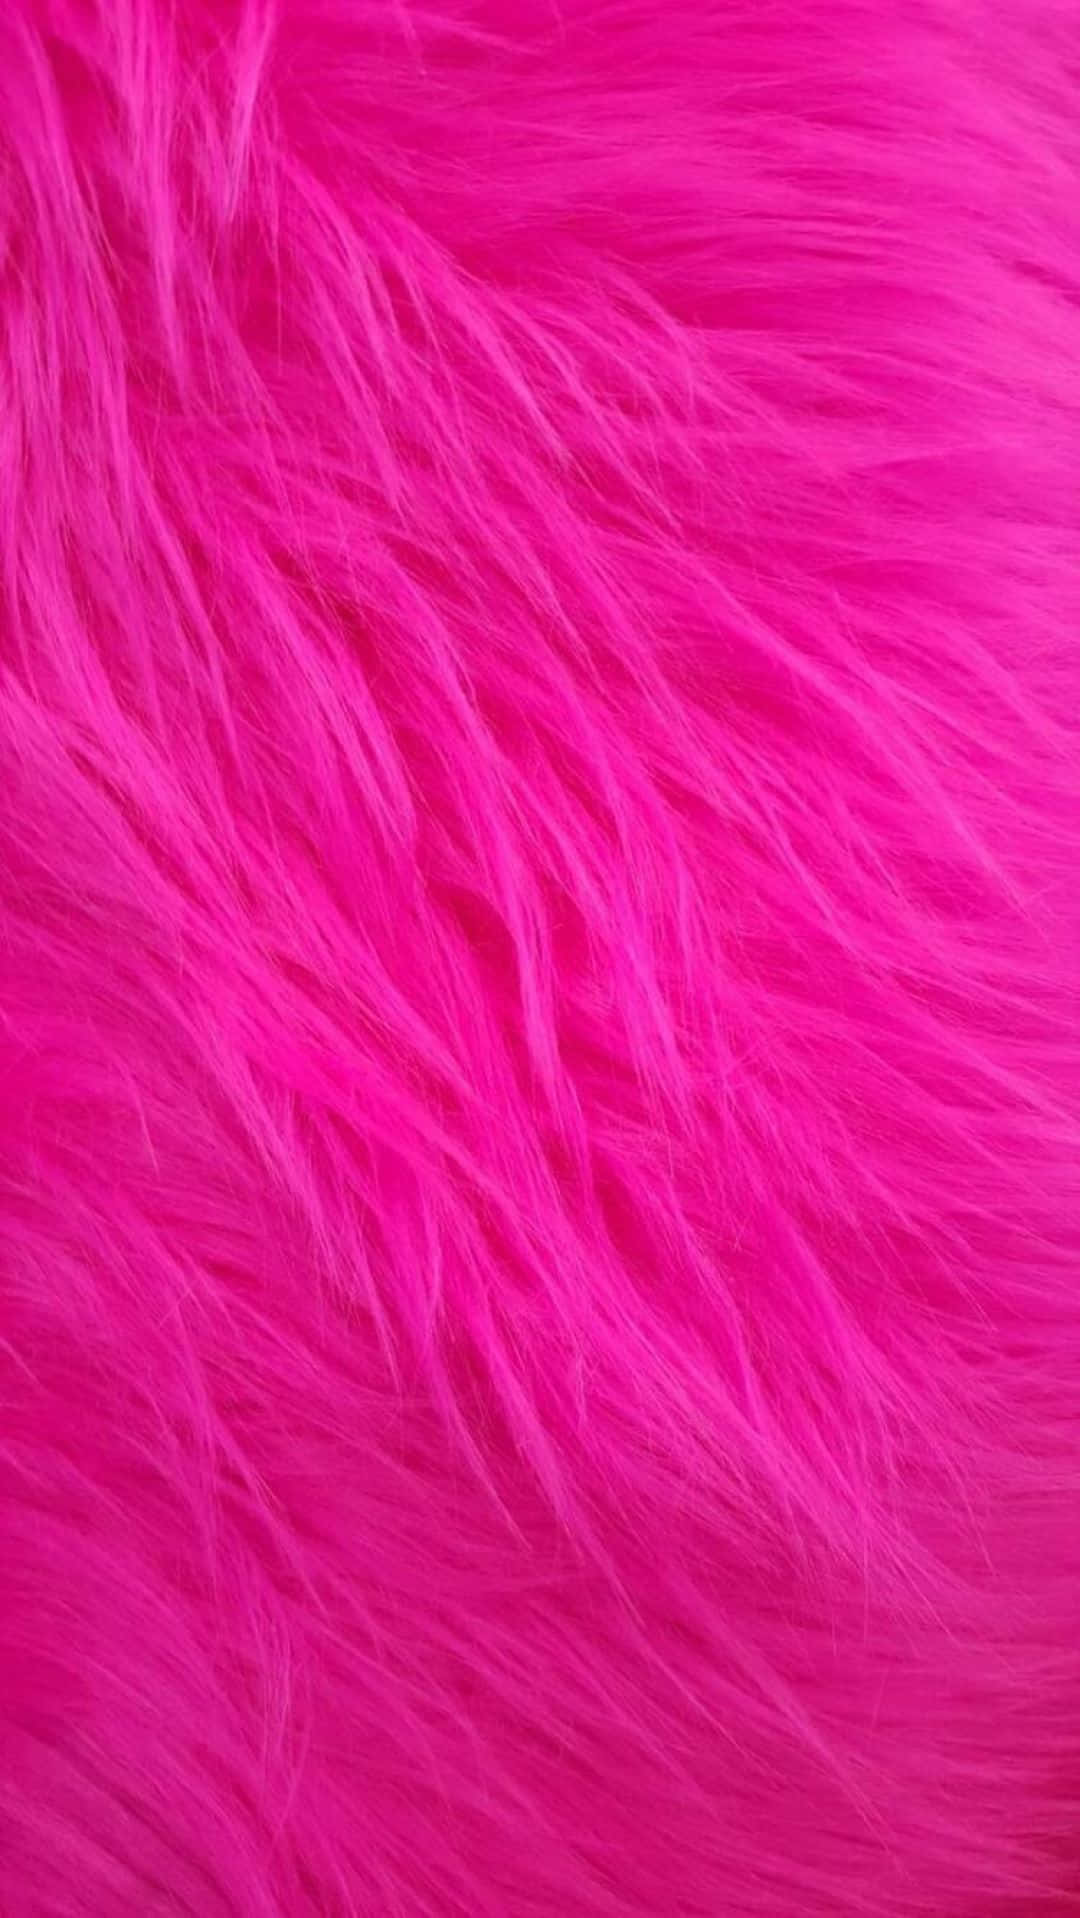 A bright pink background to brighten up any room